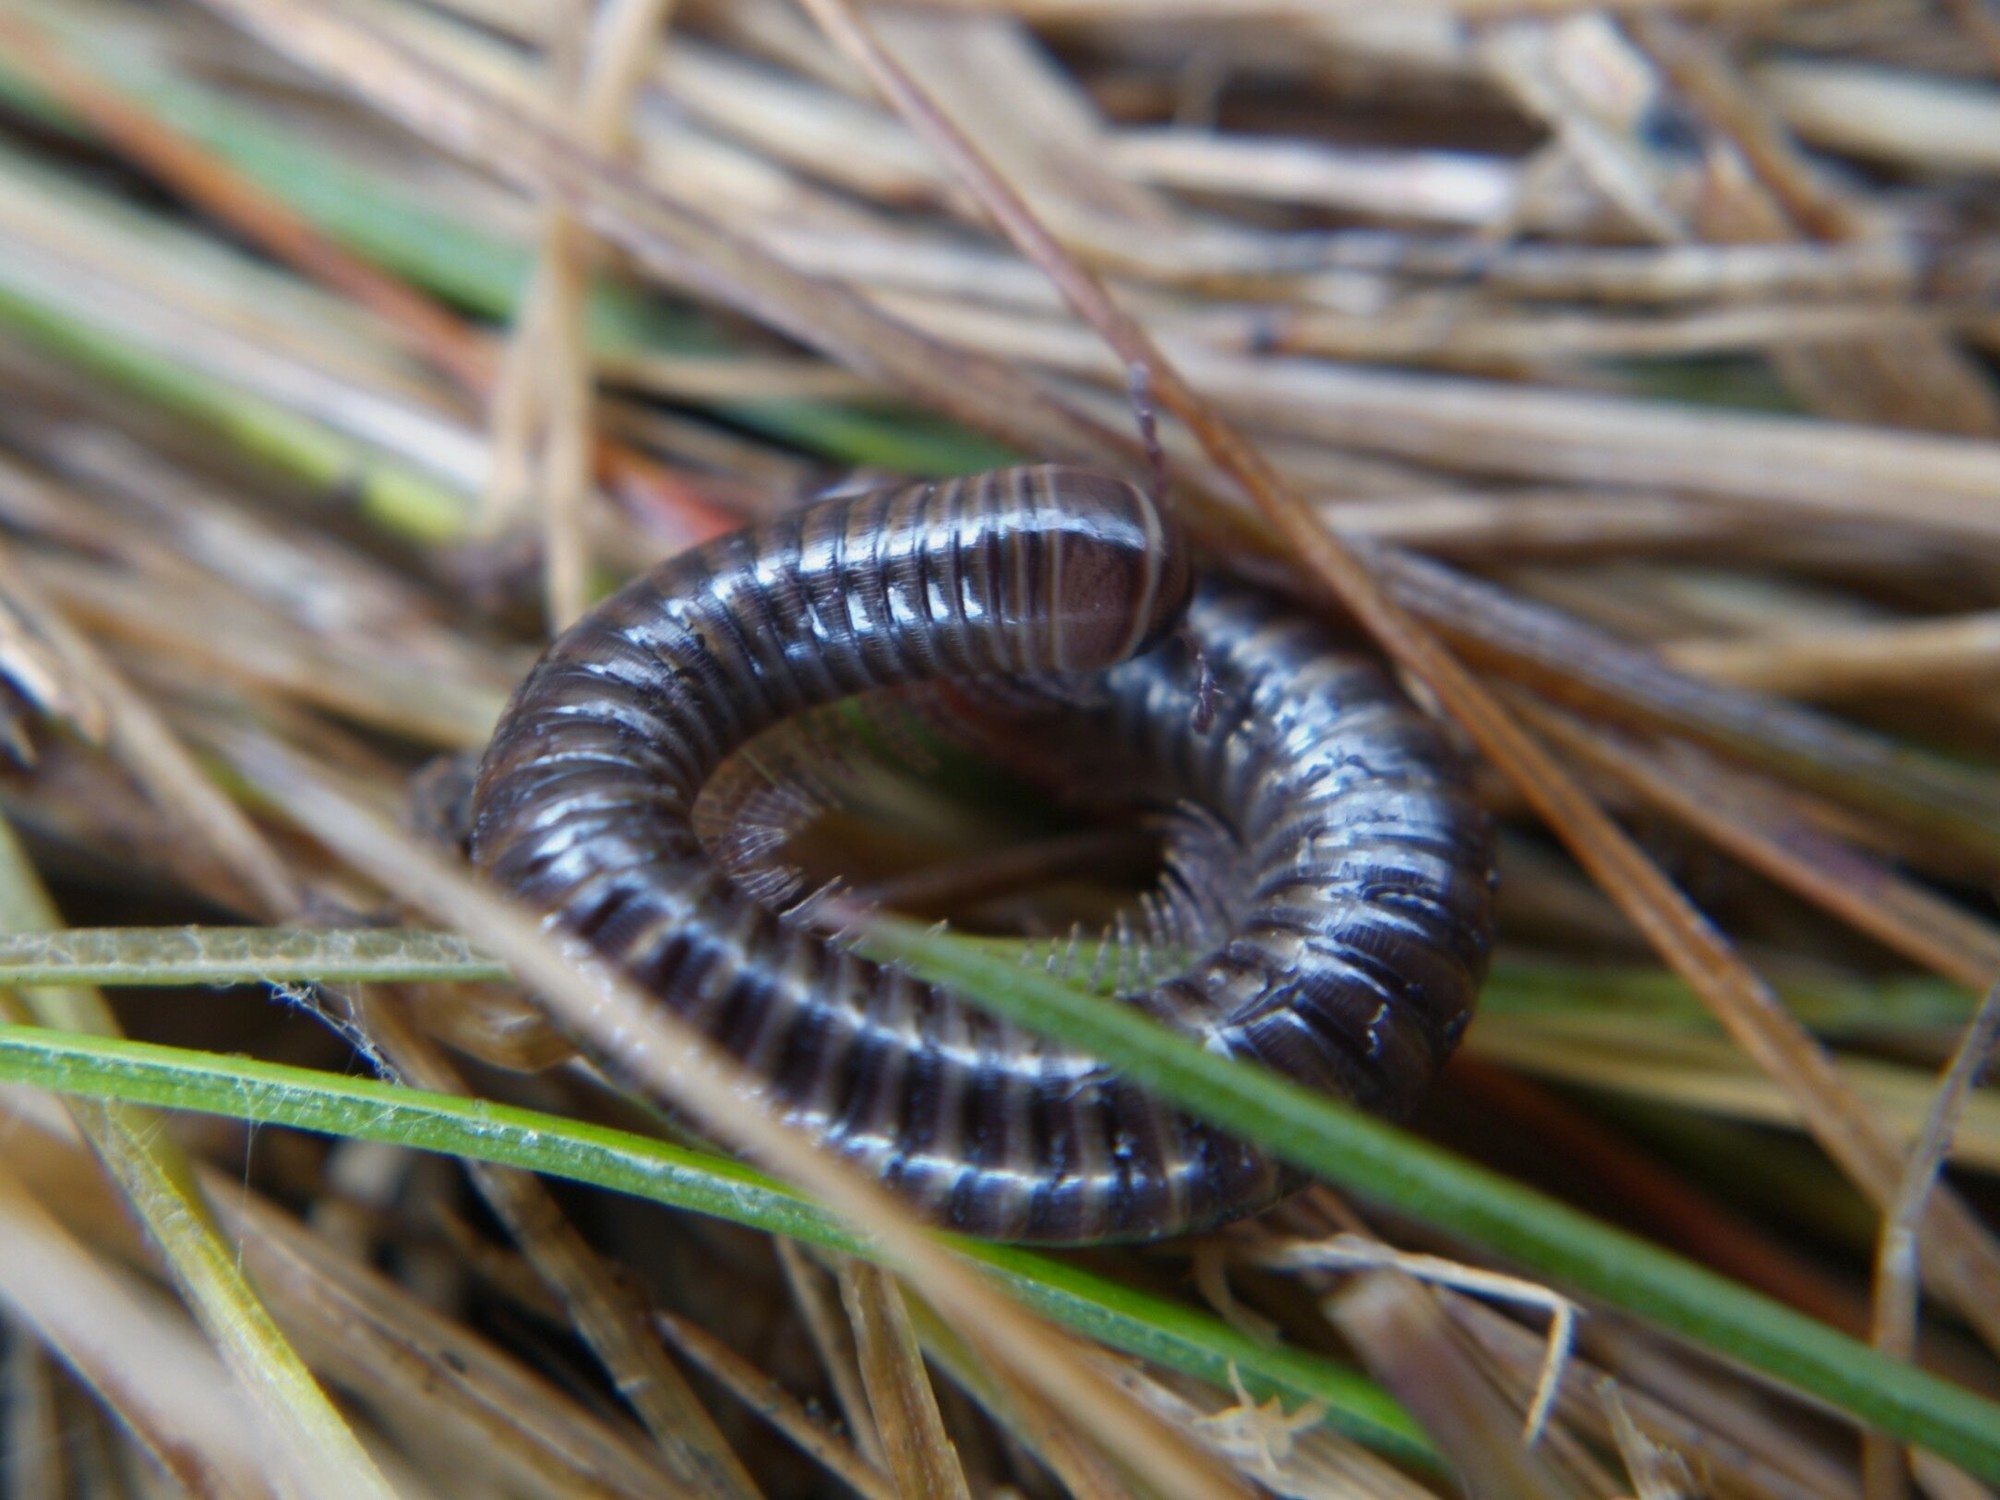 Small millipede curled in a loop